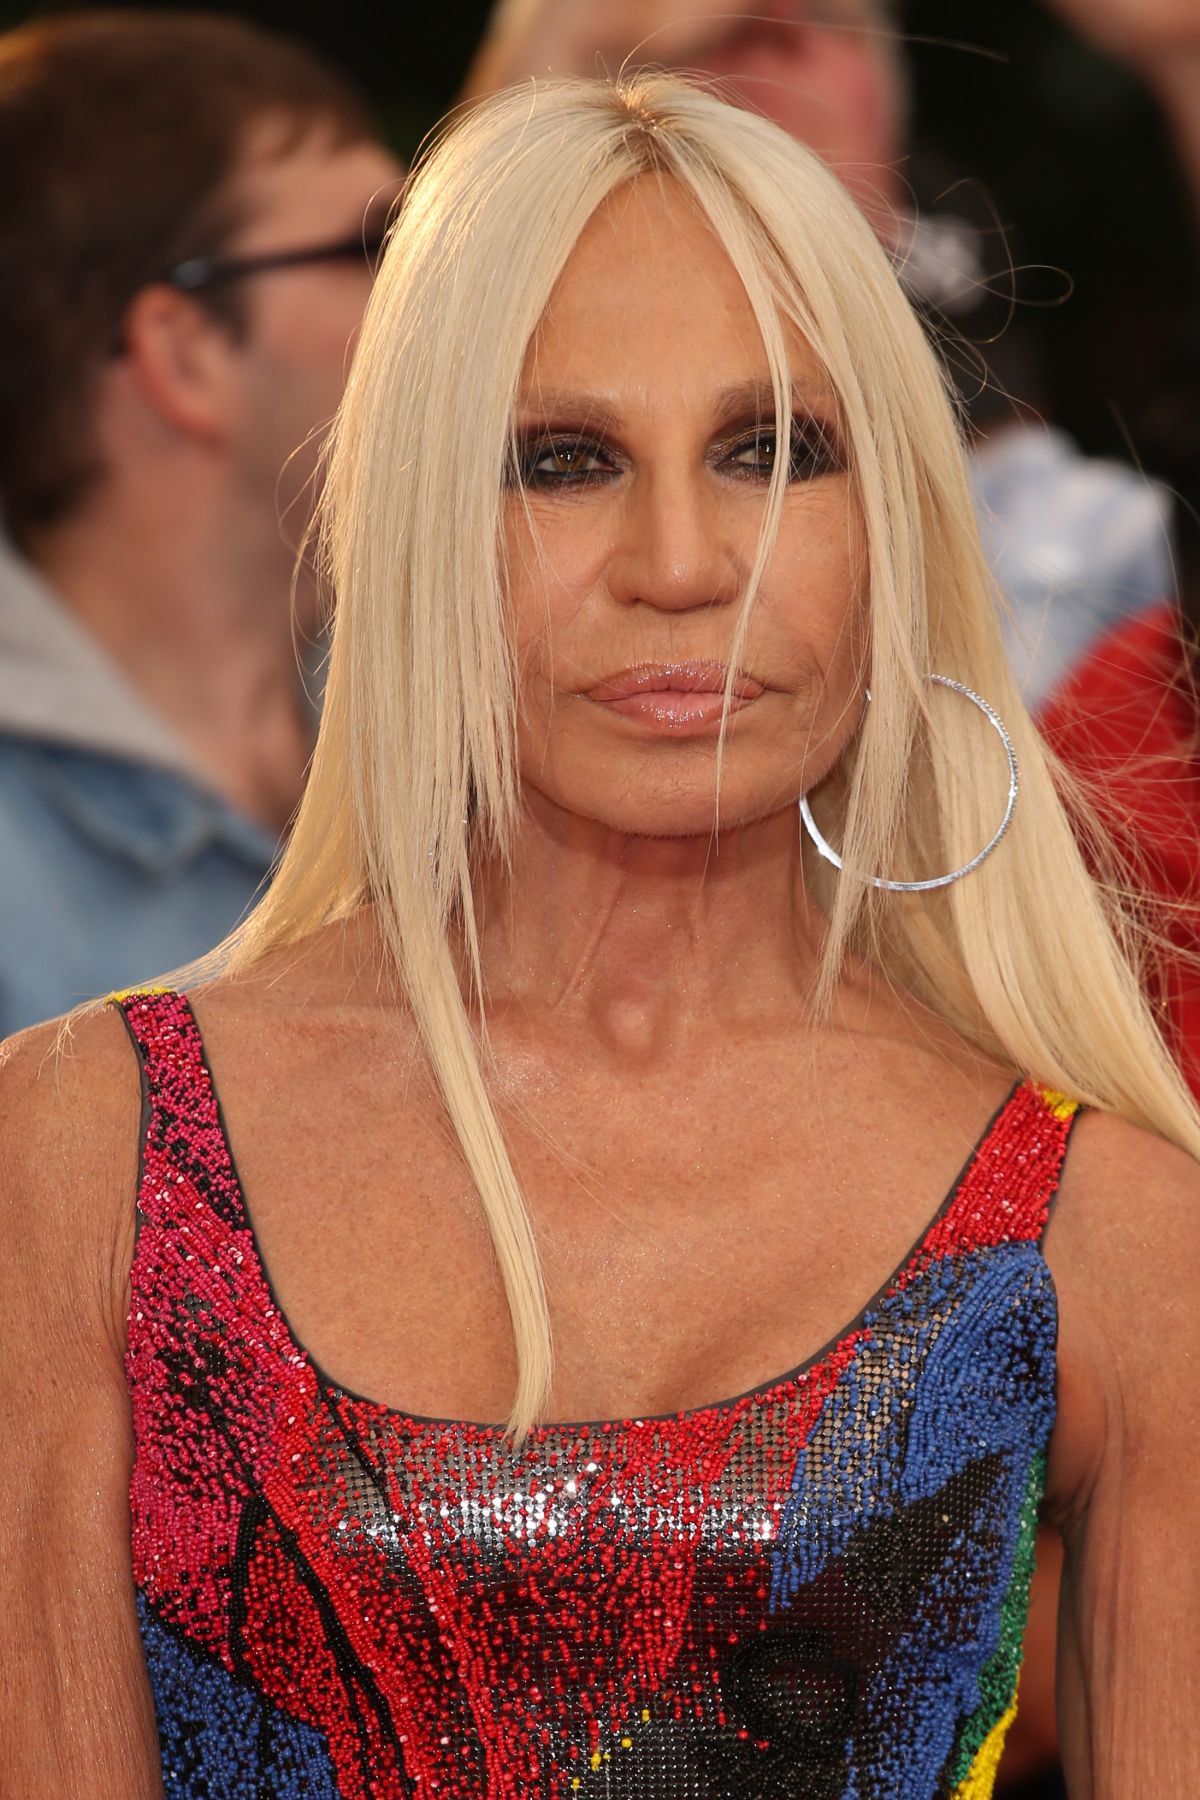 DONATELLA VERSACE at GQ Men of the Year 2018 Awards in London 09/05